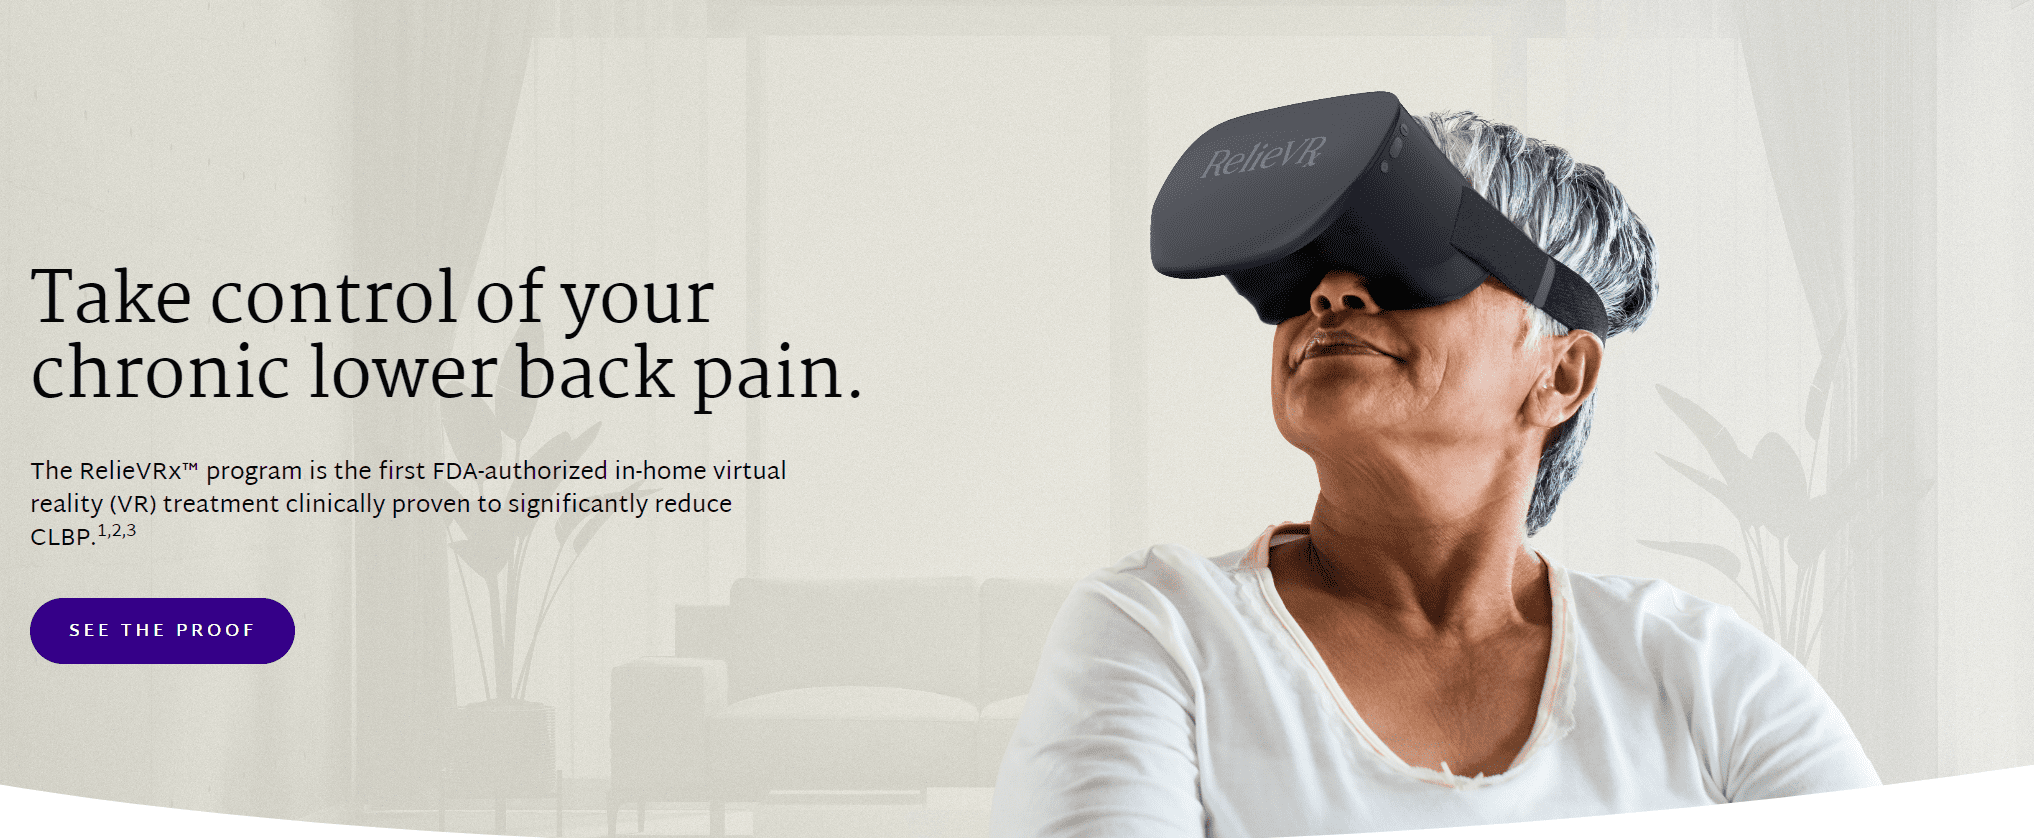 AppliedVR Releases Clinical Trial Results from In-Home Virtual Reality Program for Chronic Lower Back Pain